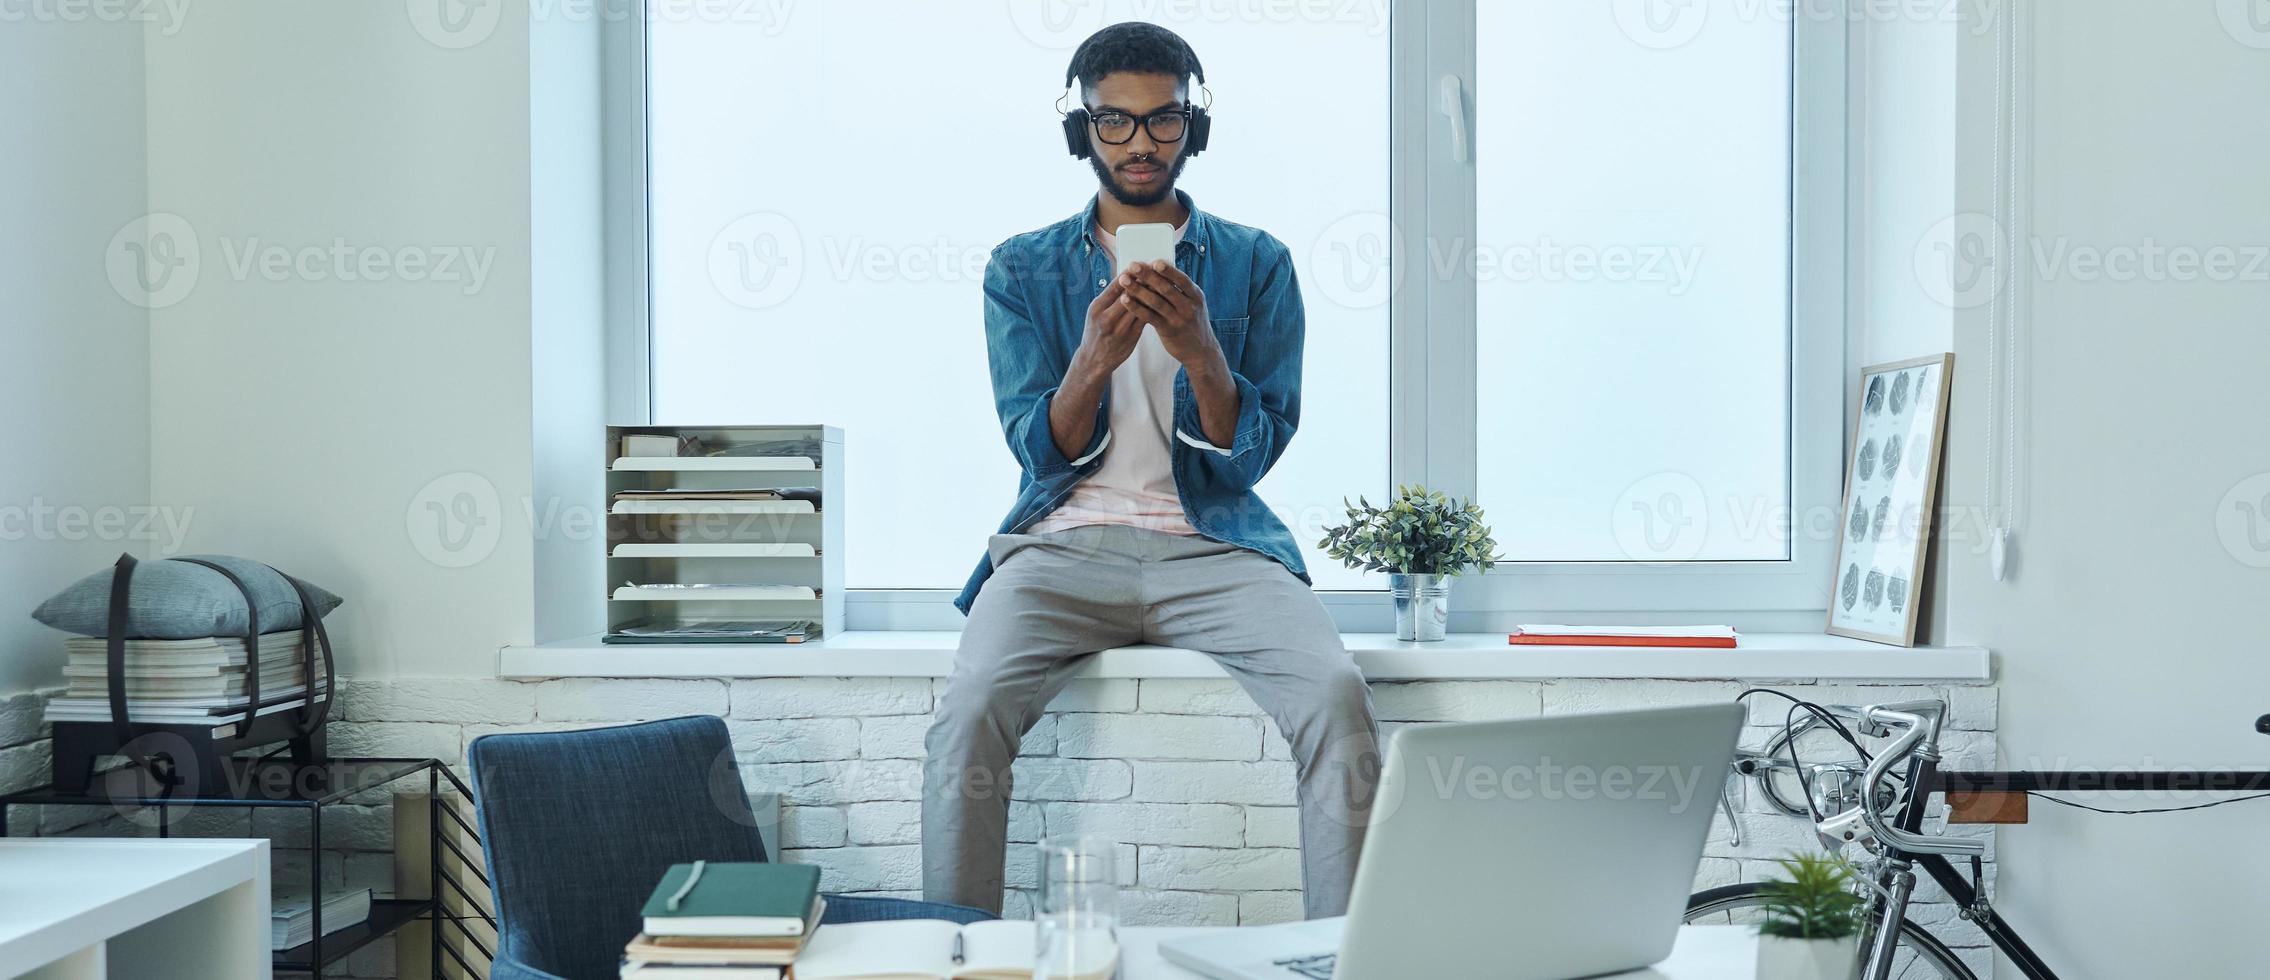 Confident African man using smart phone while sitting on the window sill in office photo